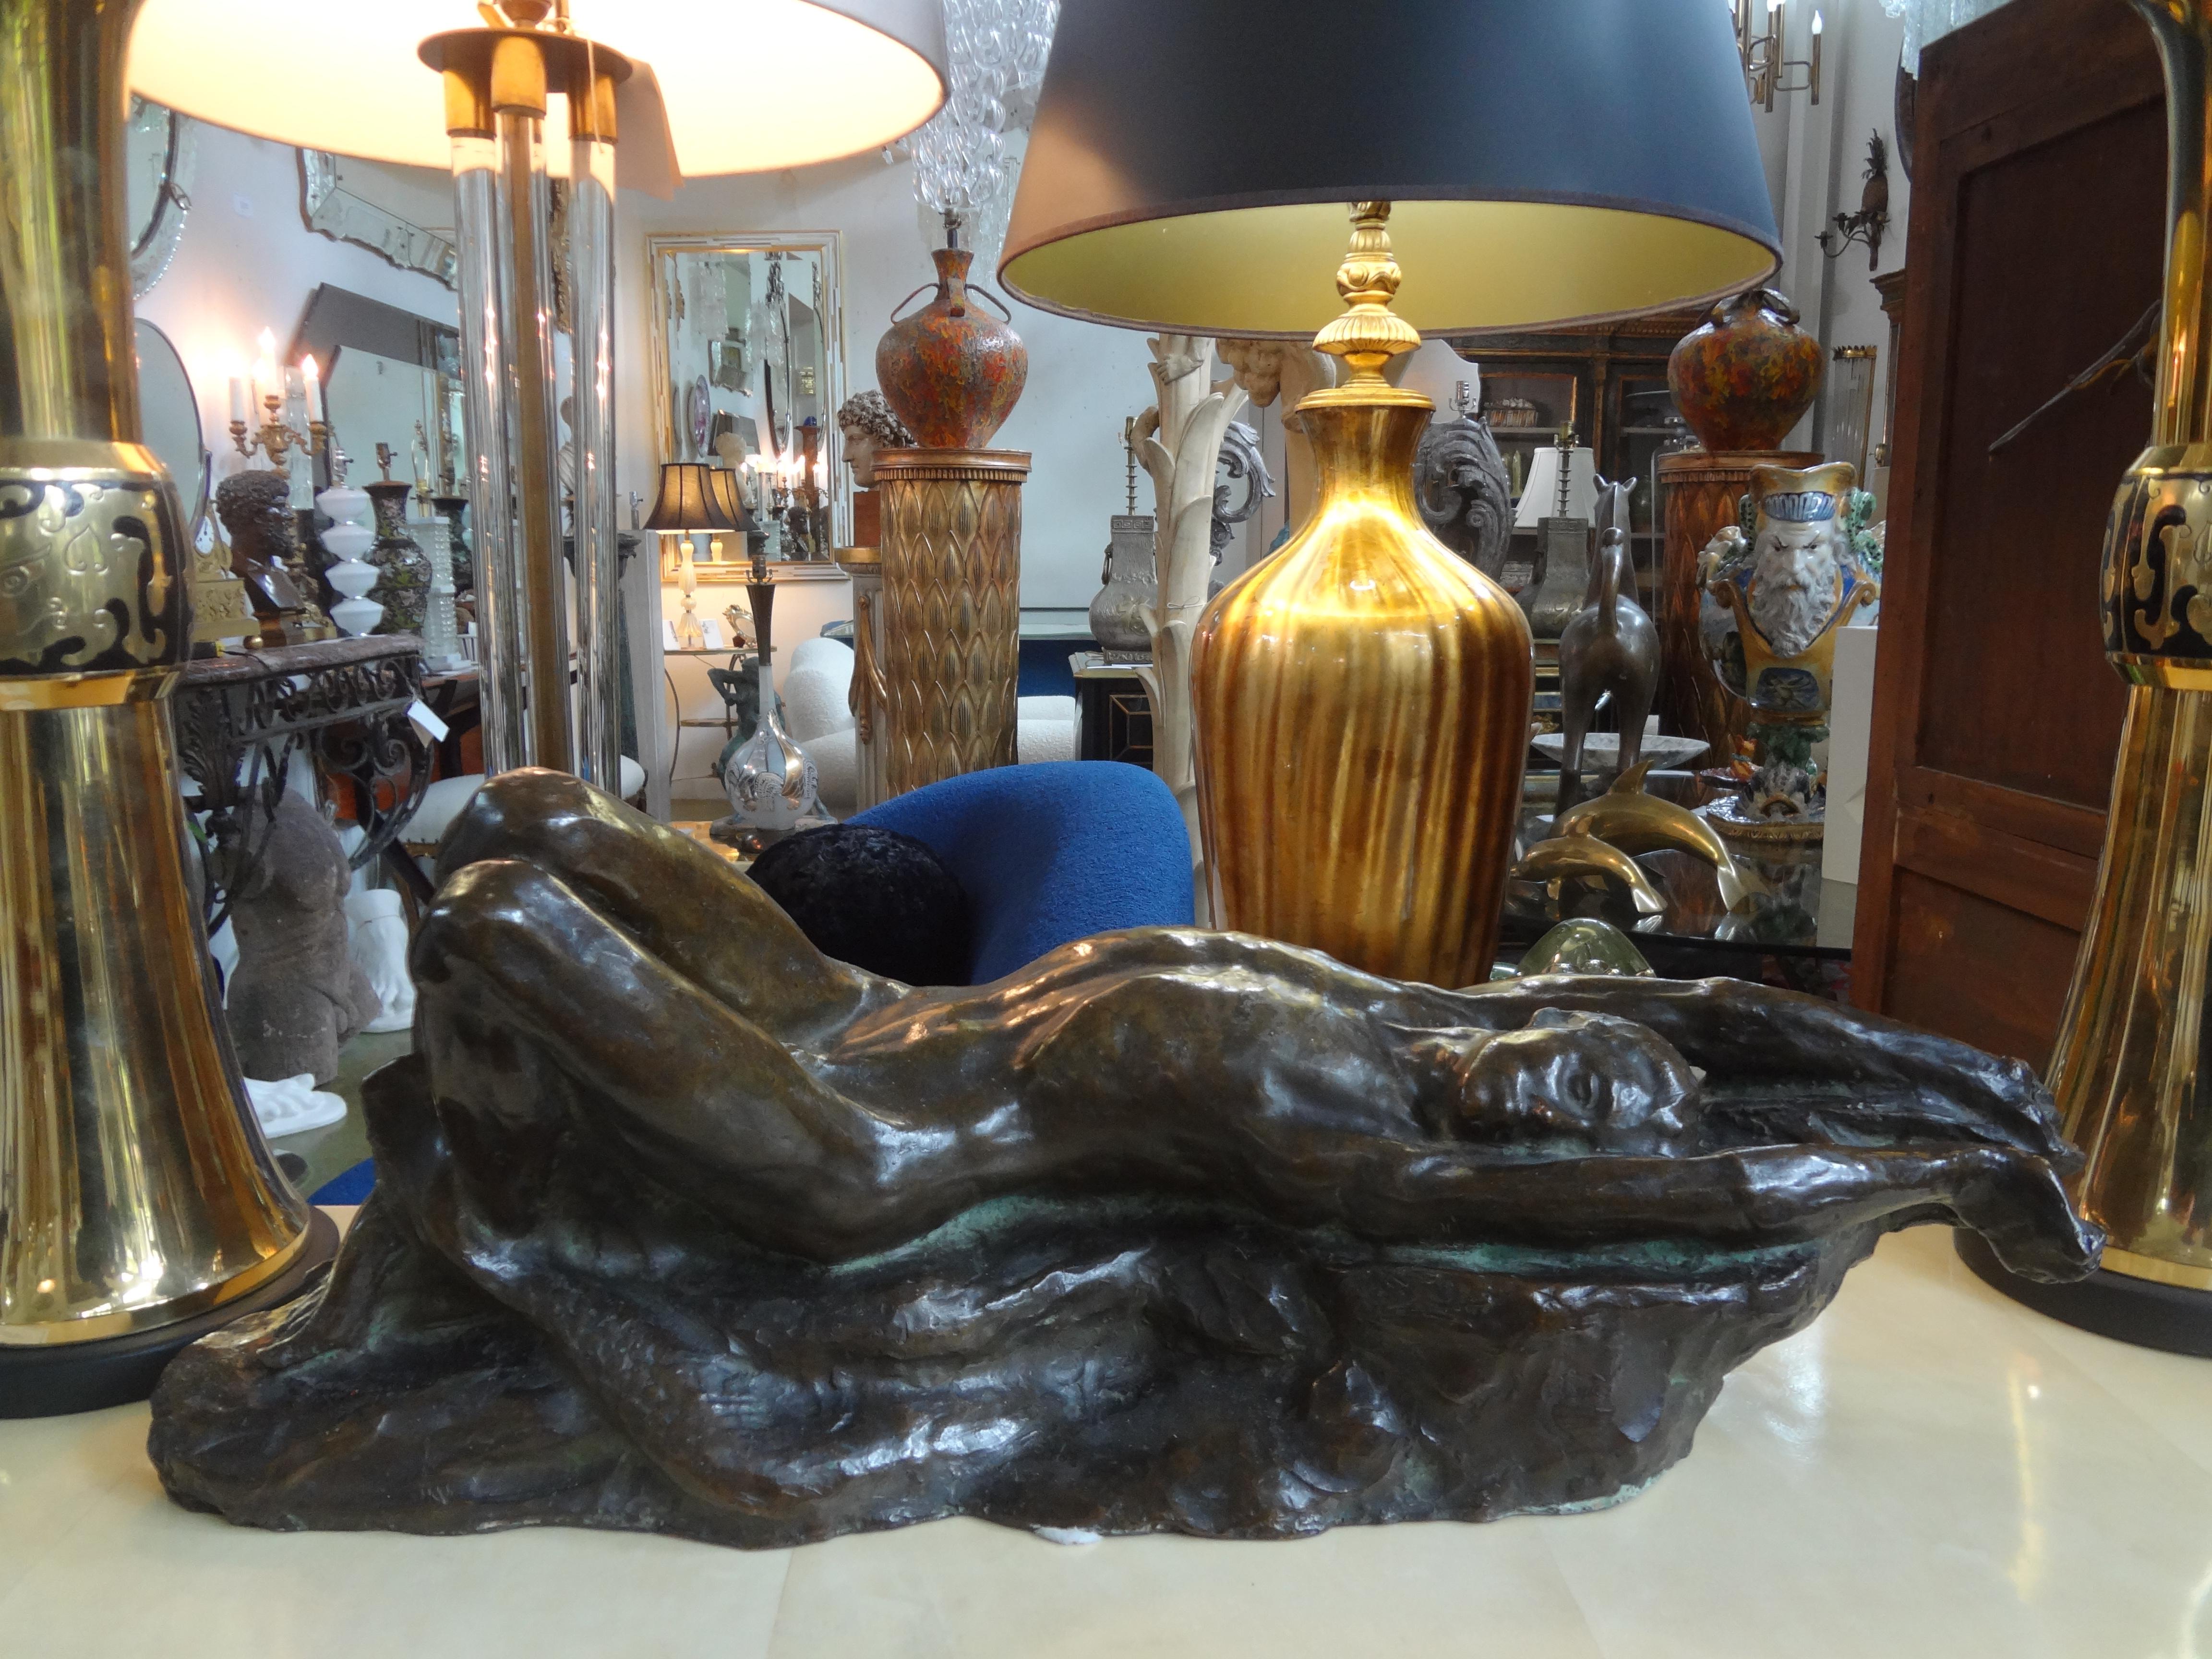 Italian Art Deco Bronze Sculpture Of A Nude Male.
We offer a handsome Italian bronze sculpture of a reclining nude male that dates to the 1940's. 
Beautiful form and great patina!